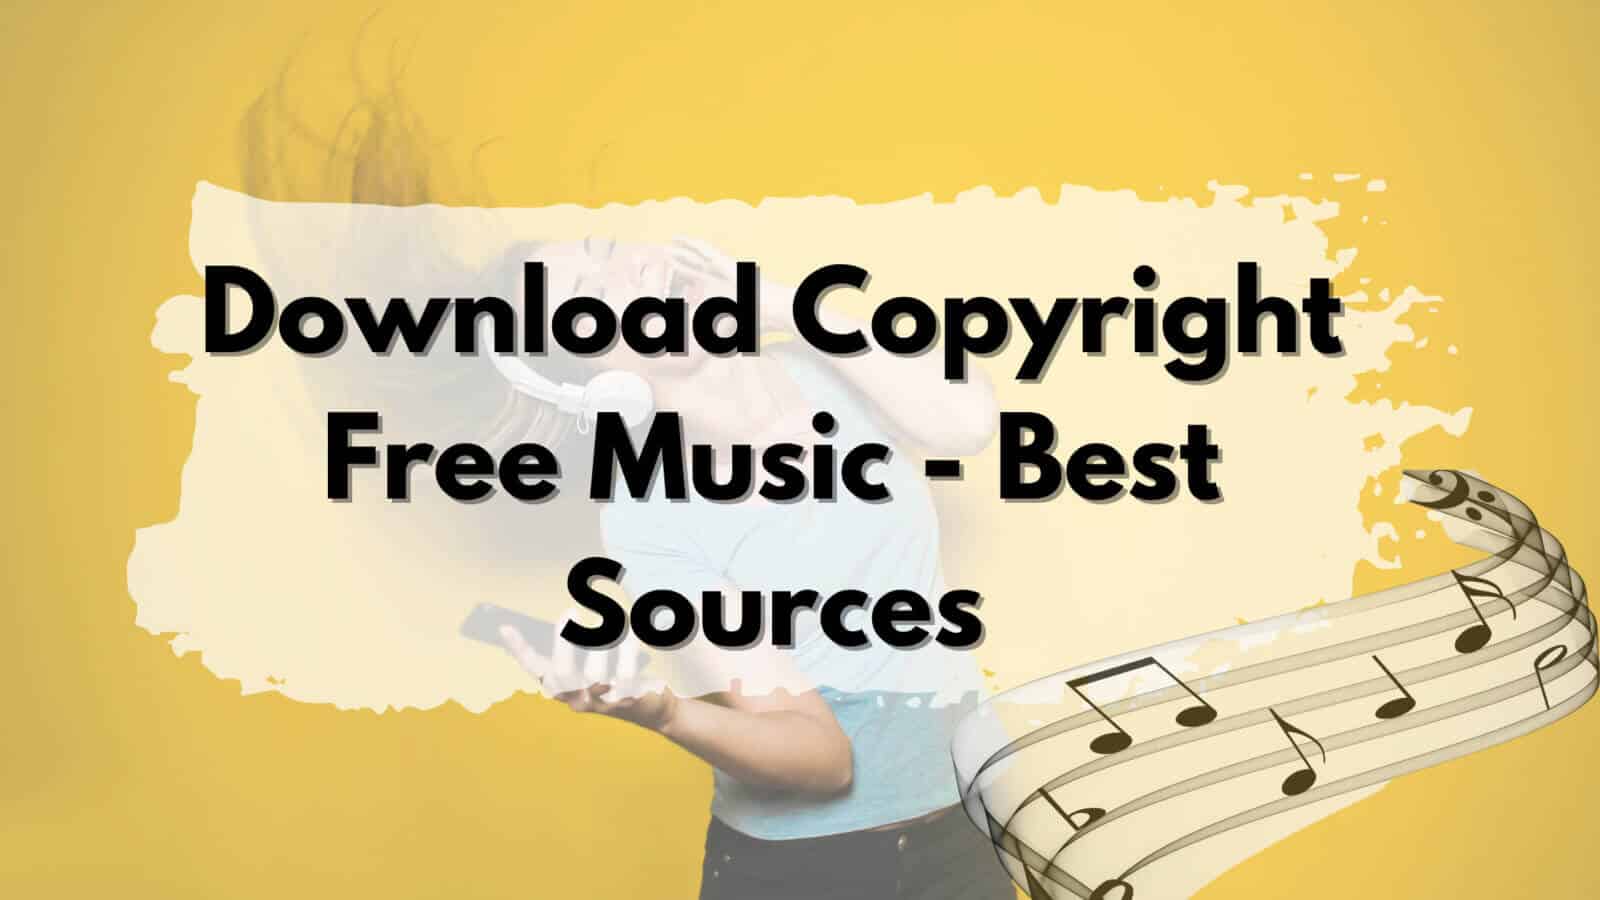 Download copyright free music from the best sources.